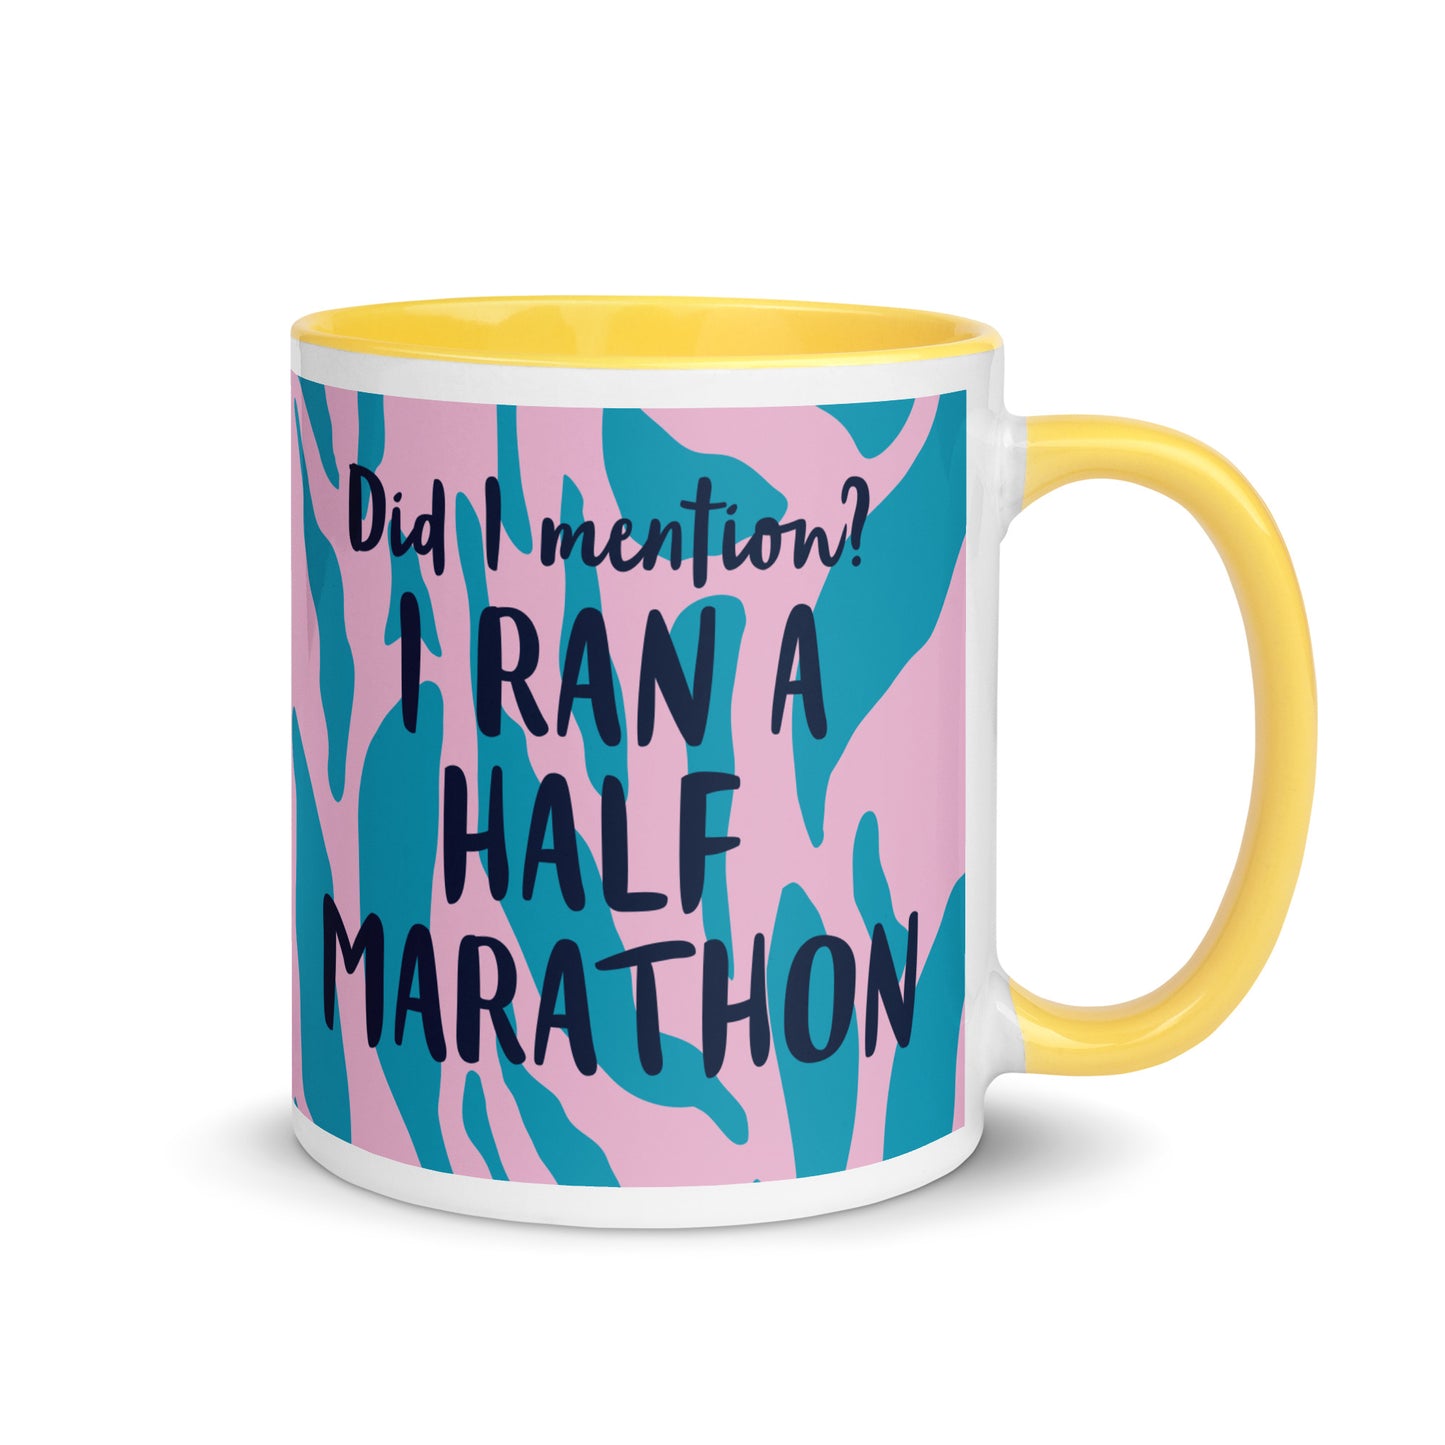 yellow handled mug with pink and blue tiger print, and the phrase did i mention? I ran a marathon in a bold font